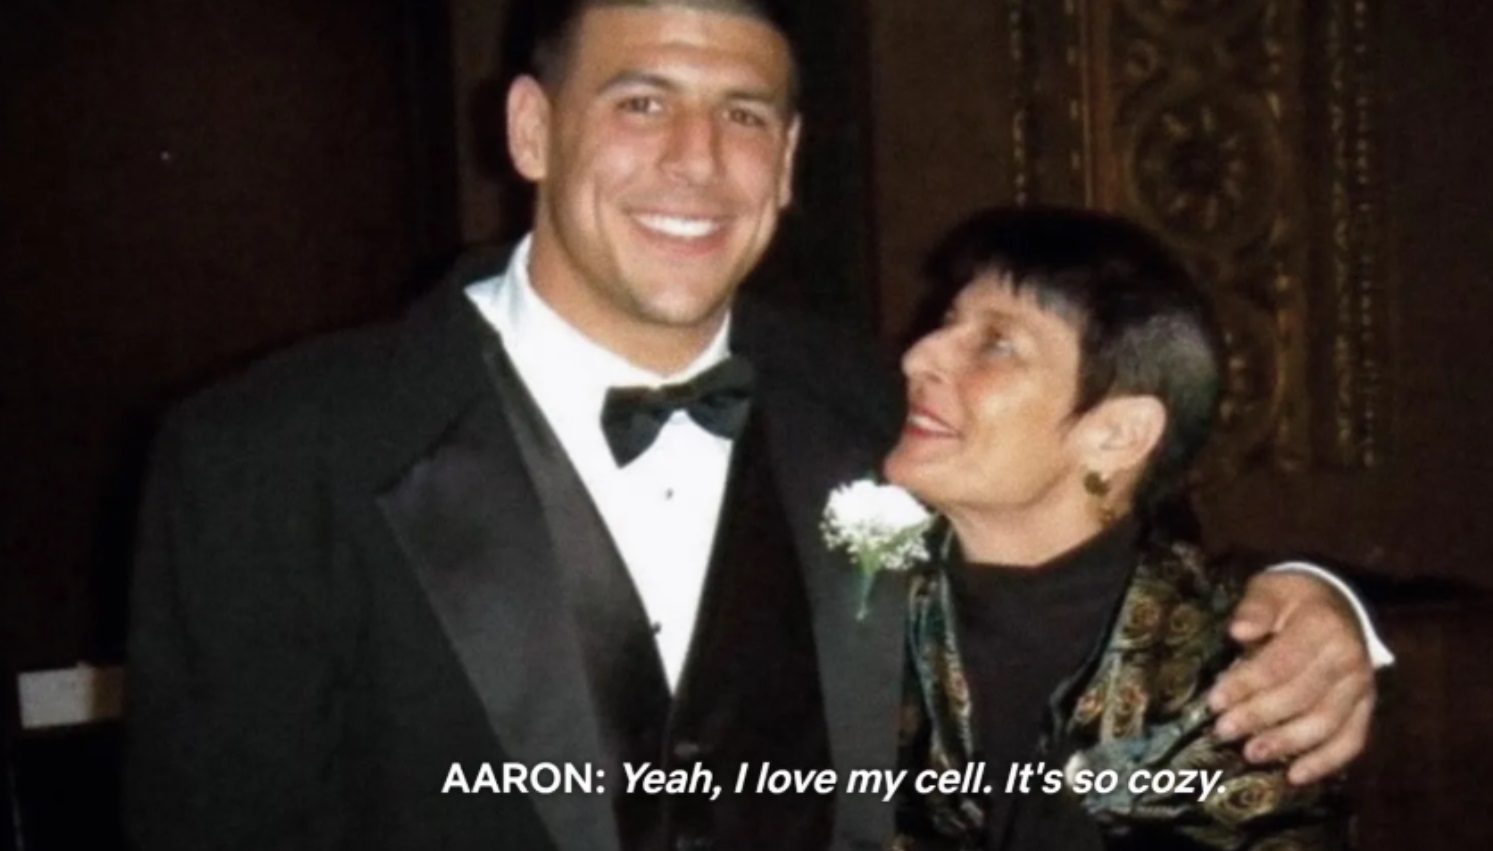 PHOTO Aaron Hernandez With His Arm Around His Mother Telling Her His Jail Cell Is Cozy